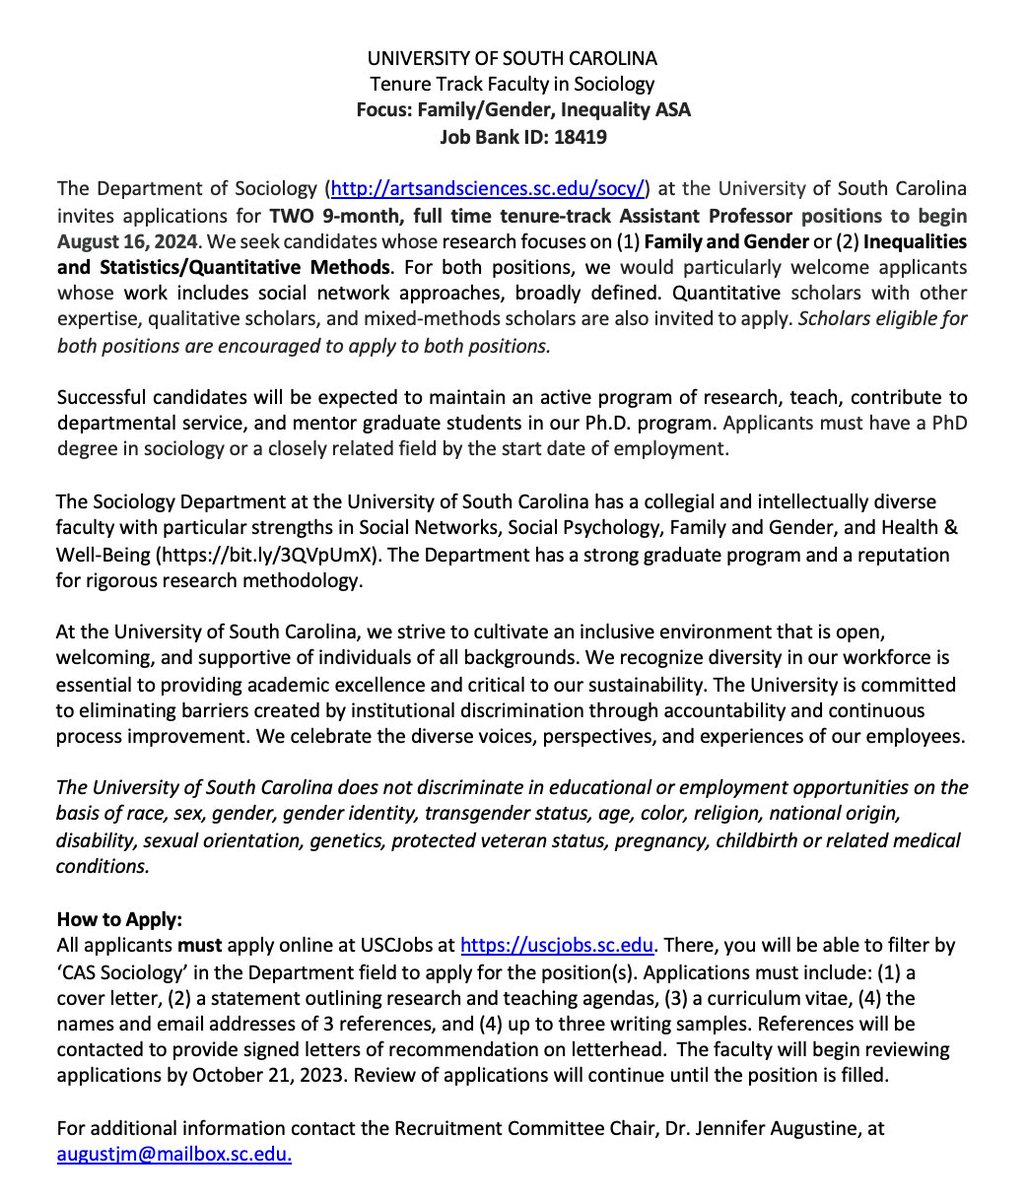 🚨 My amazing department @UofSC is hiring TWO tenure-track Assistant Professor positions this year! Please share widely and reach out if you have questions! #sociologyjobs #soctwitter